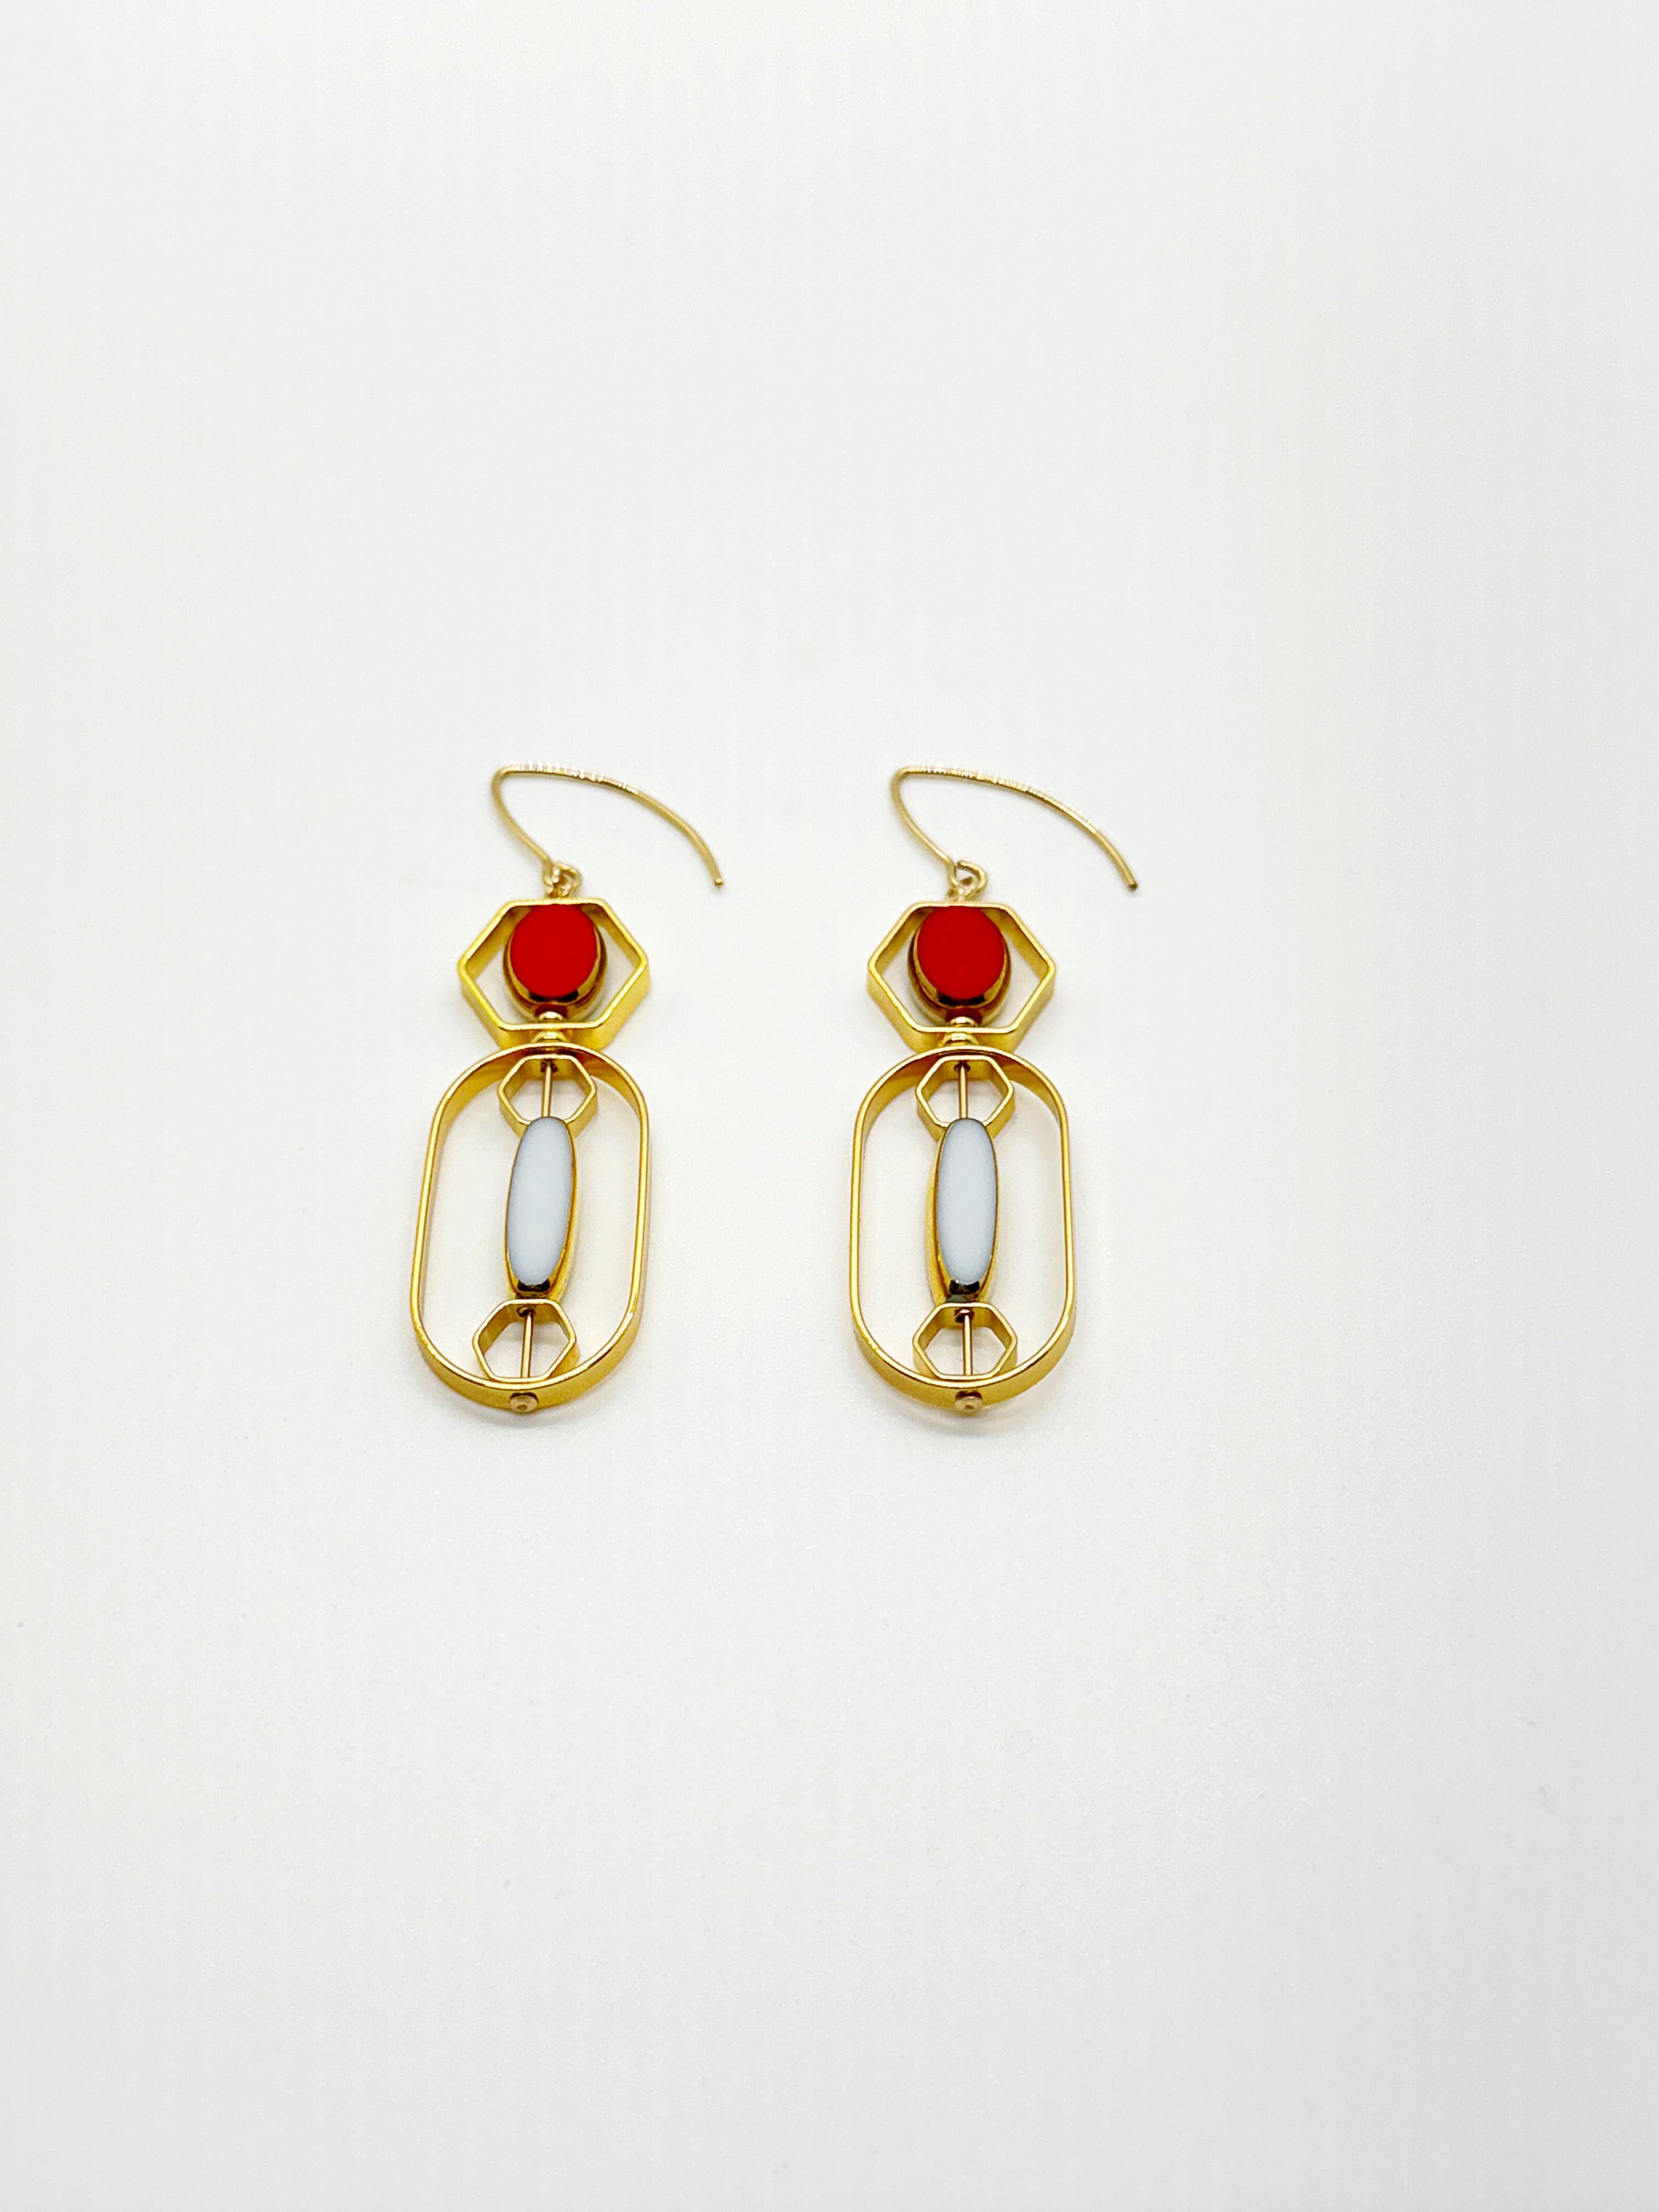 The earrings are light weight and are made to rotate and reposition with movement.

The earrings consist of small red oval and long white oval shaped beads. They are new old stock vintage German glass beads that are framed with 24K gold. The beads